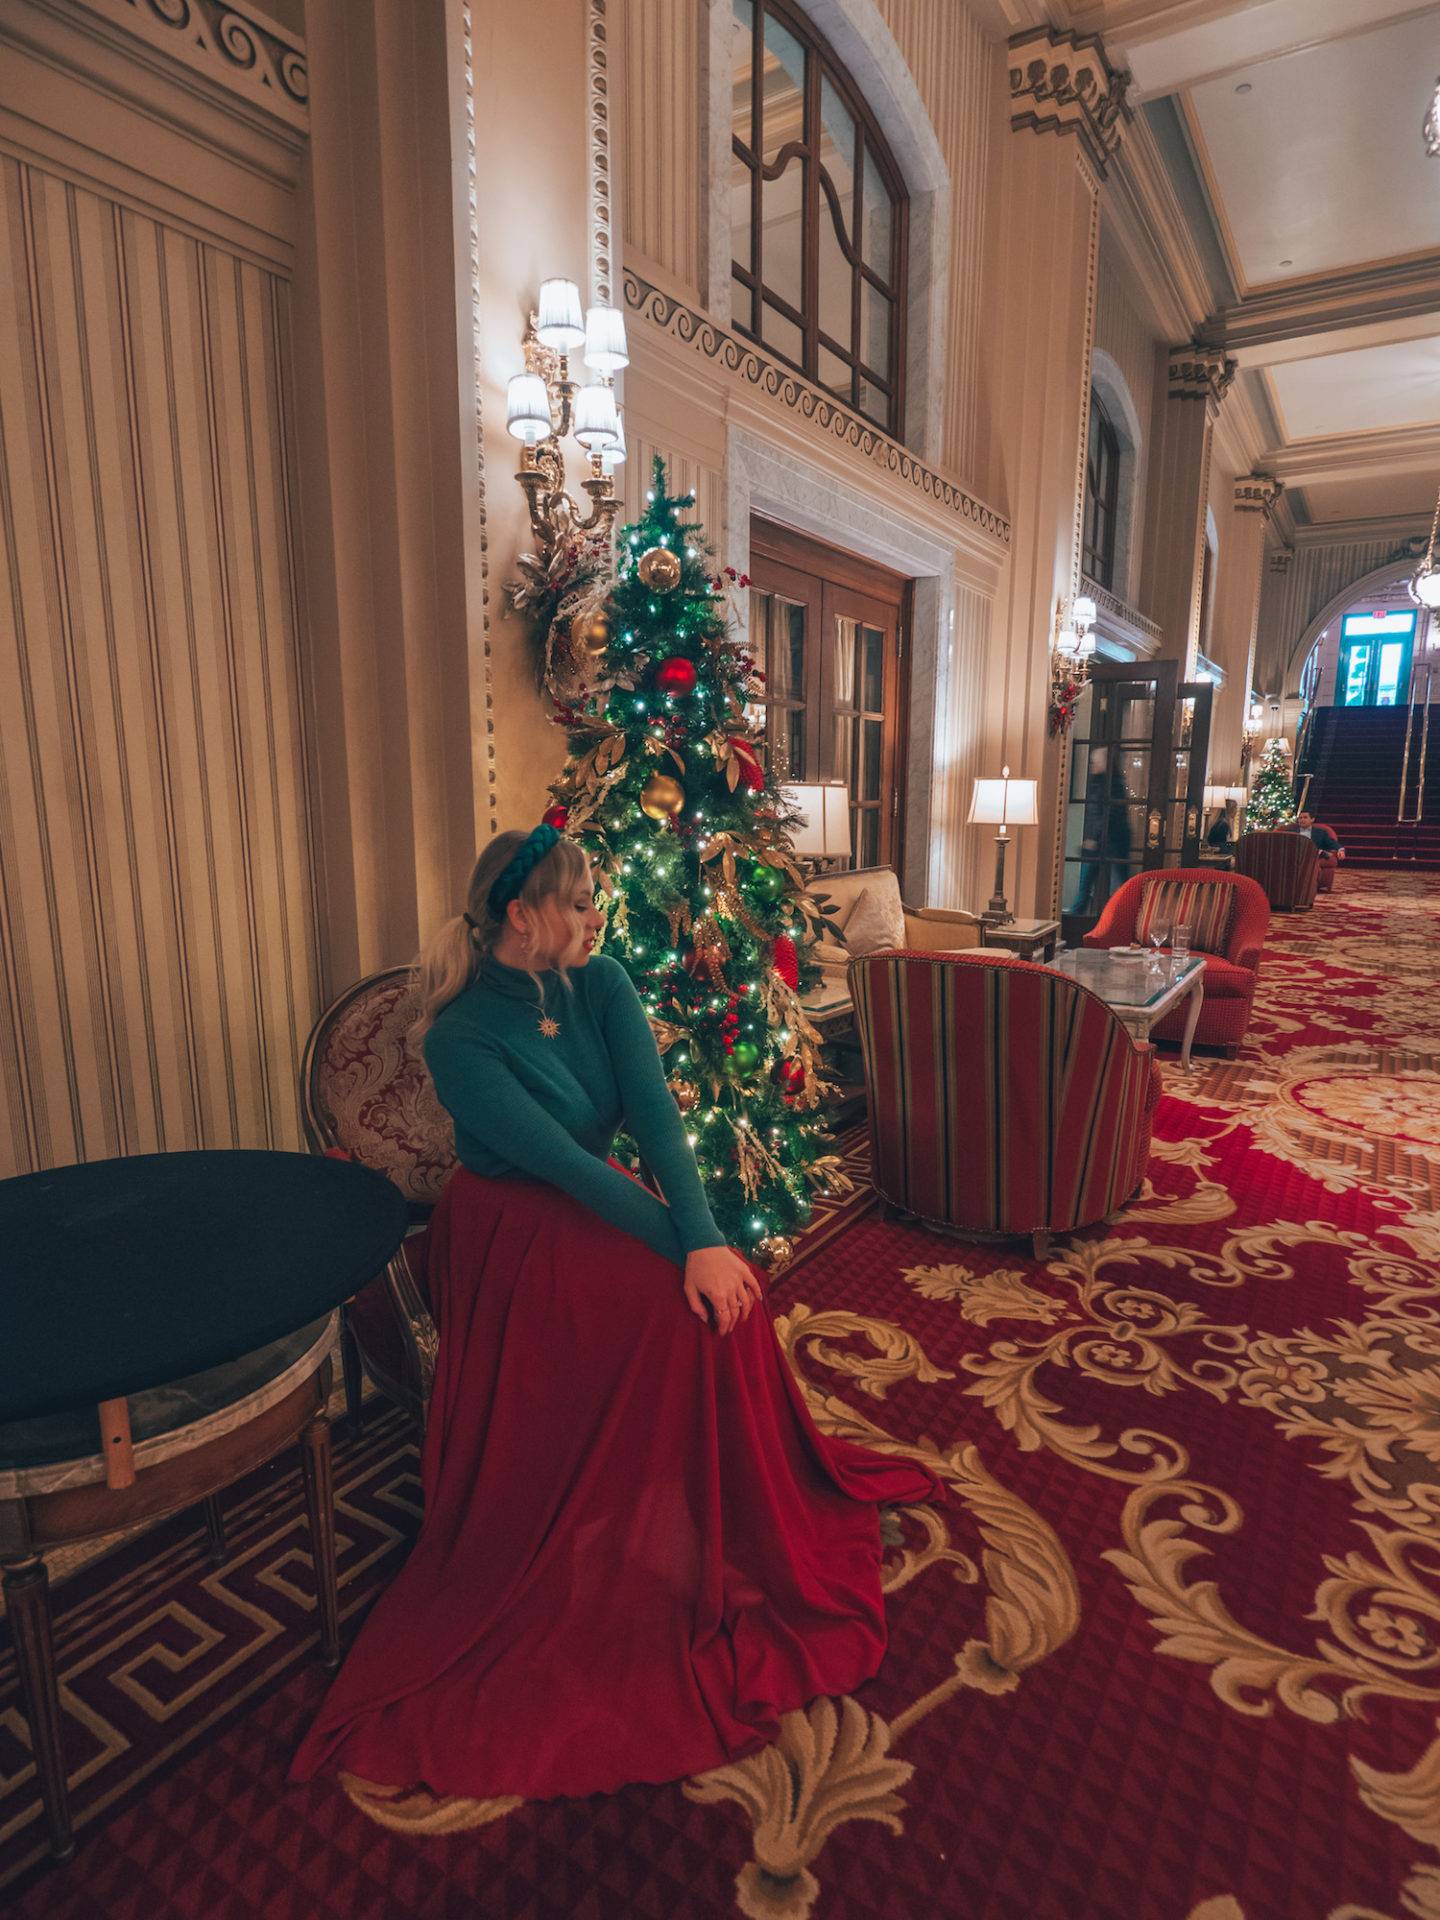 Incredibly festive things to do in Washington DC at Christmas time: Visit the Willard and have their holiday high tea